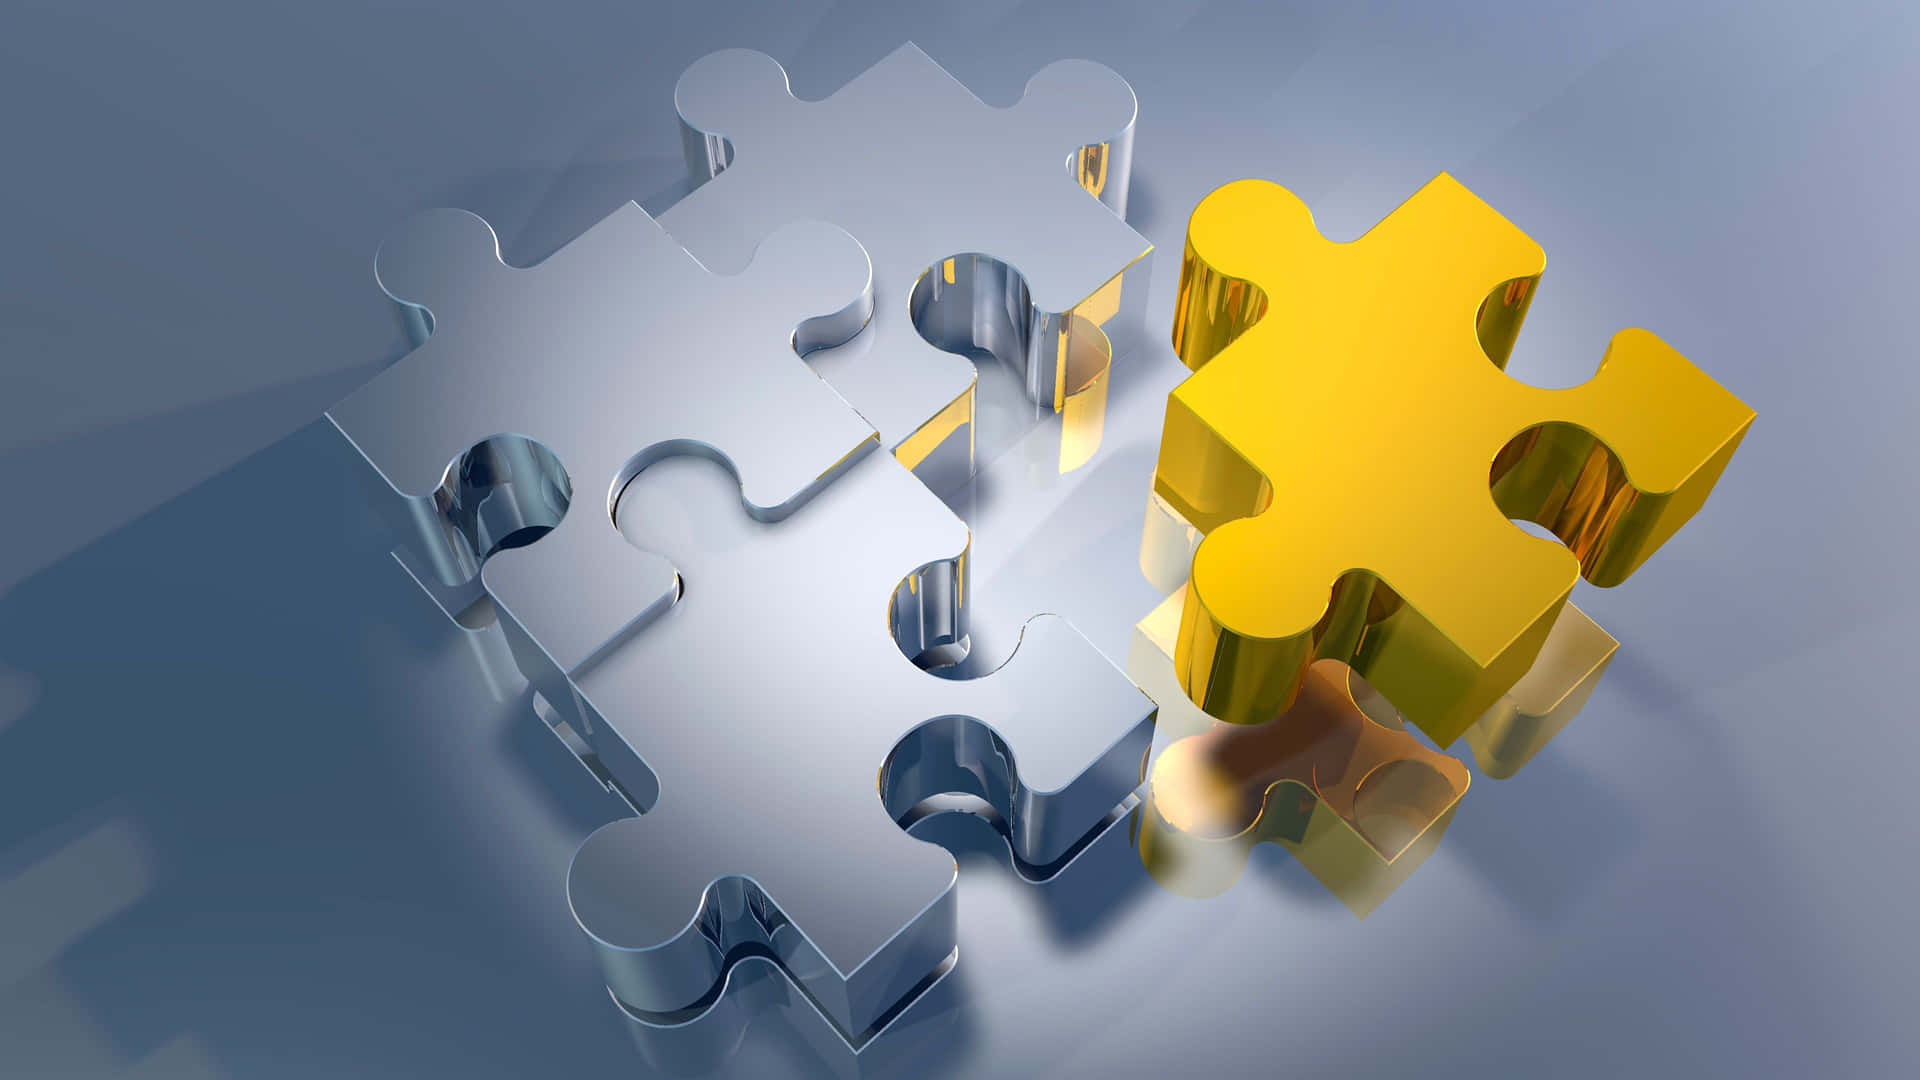 A Puzzle Piece With A Yellow Piece On Top